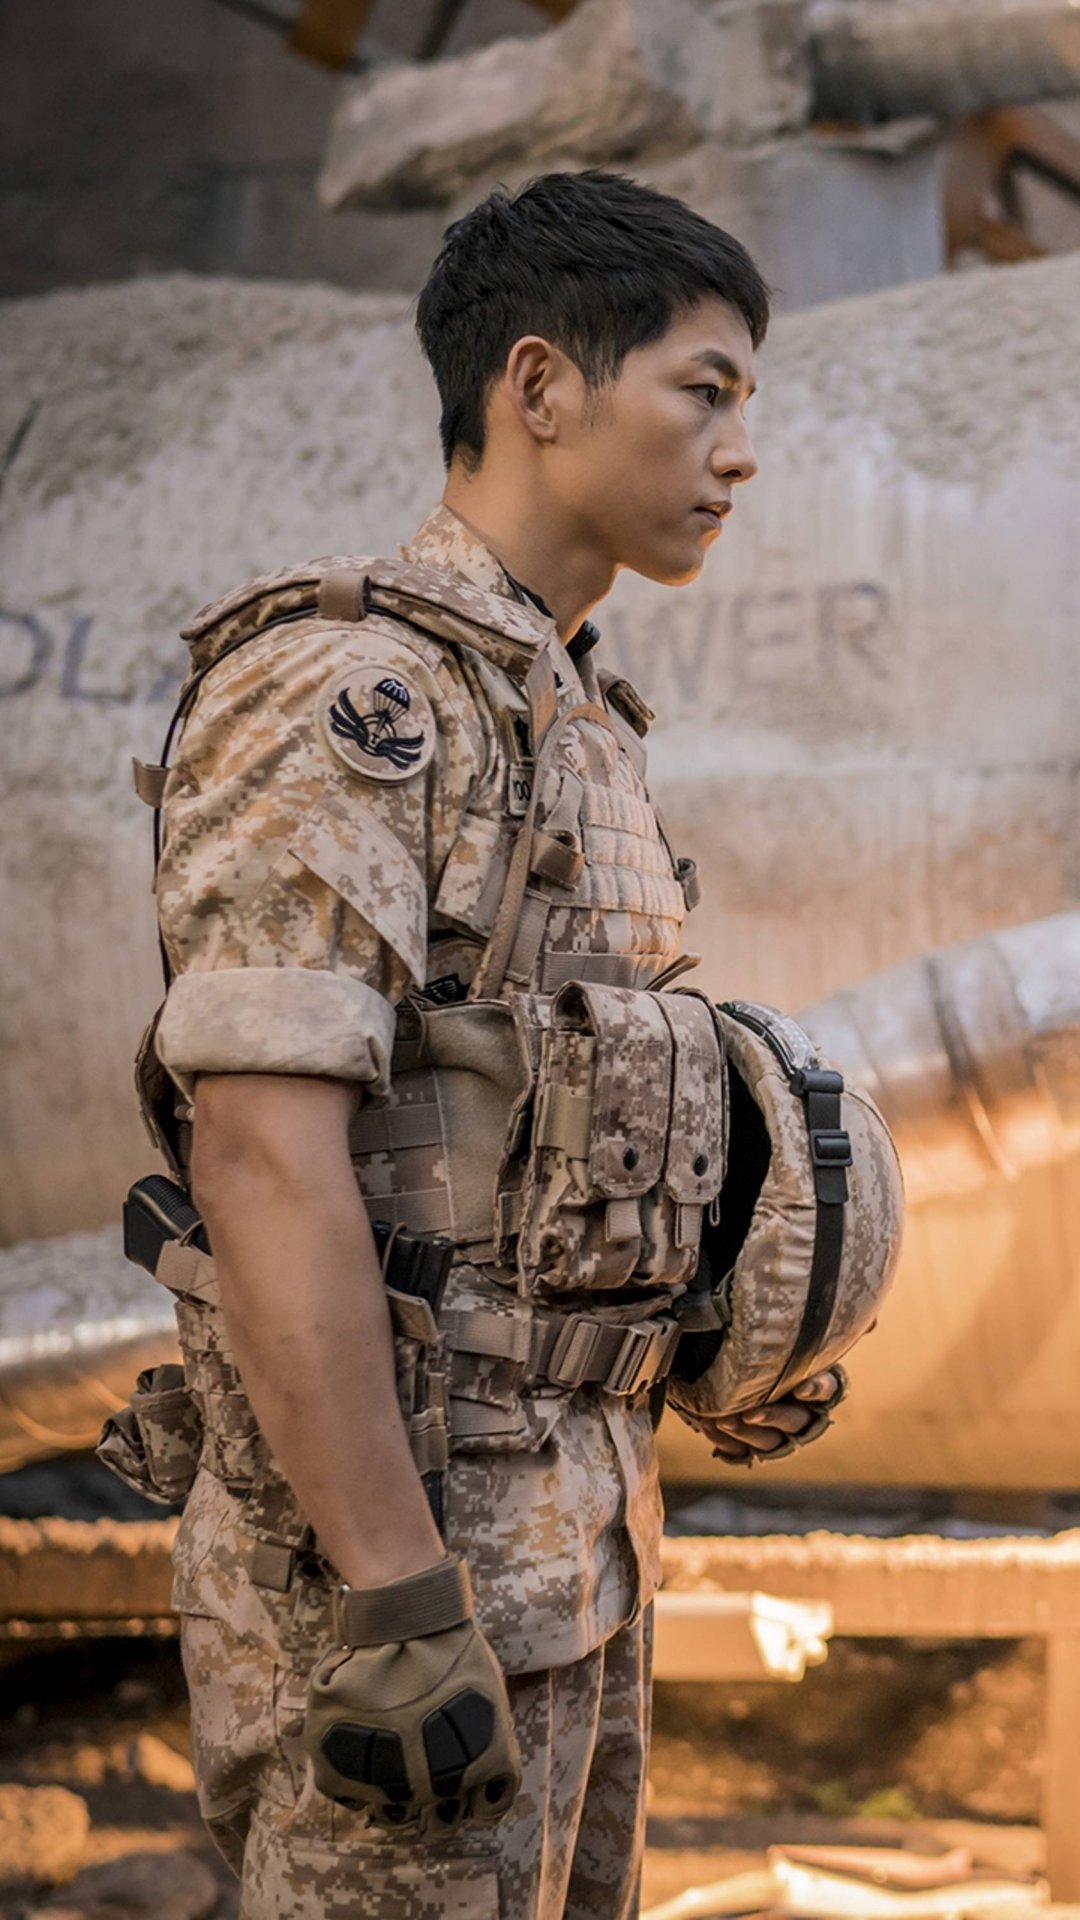 descendants of the sun wallpaper,soldier,military camouflage,military uniform,military,army